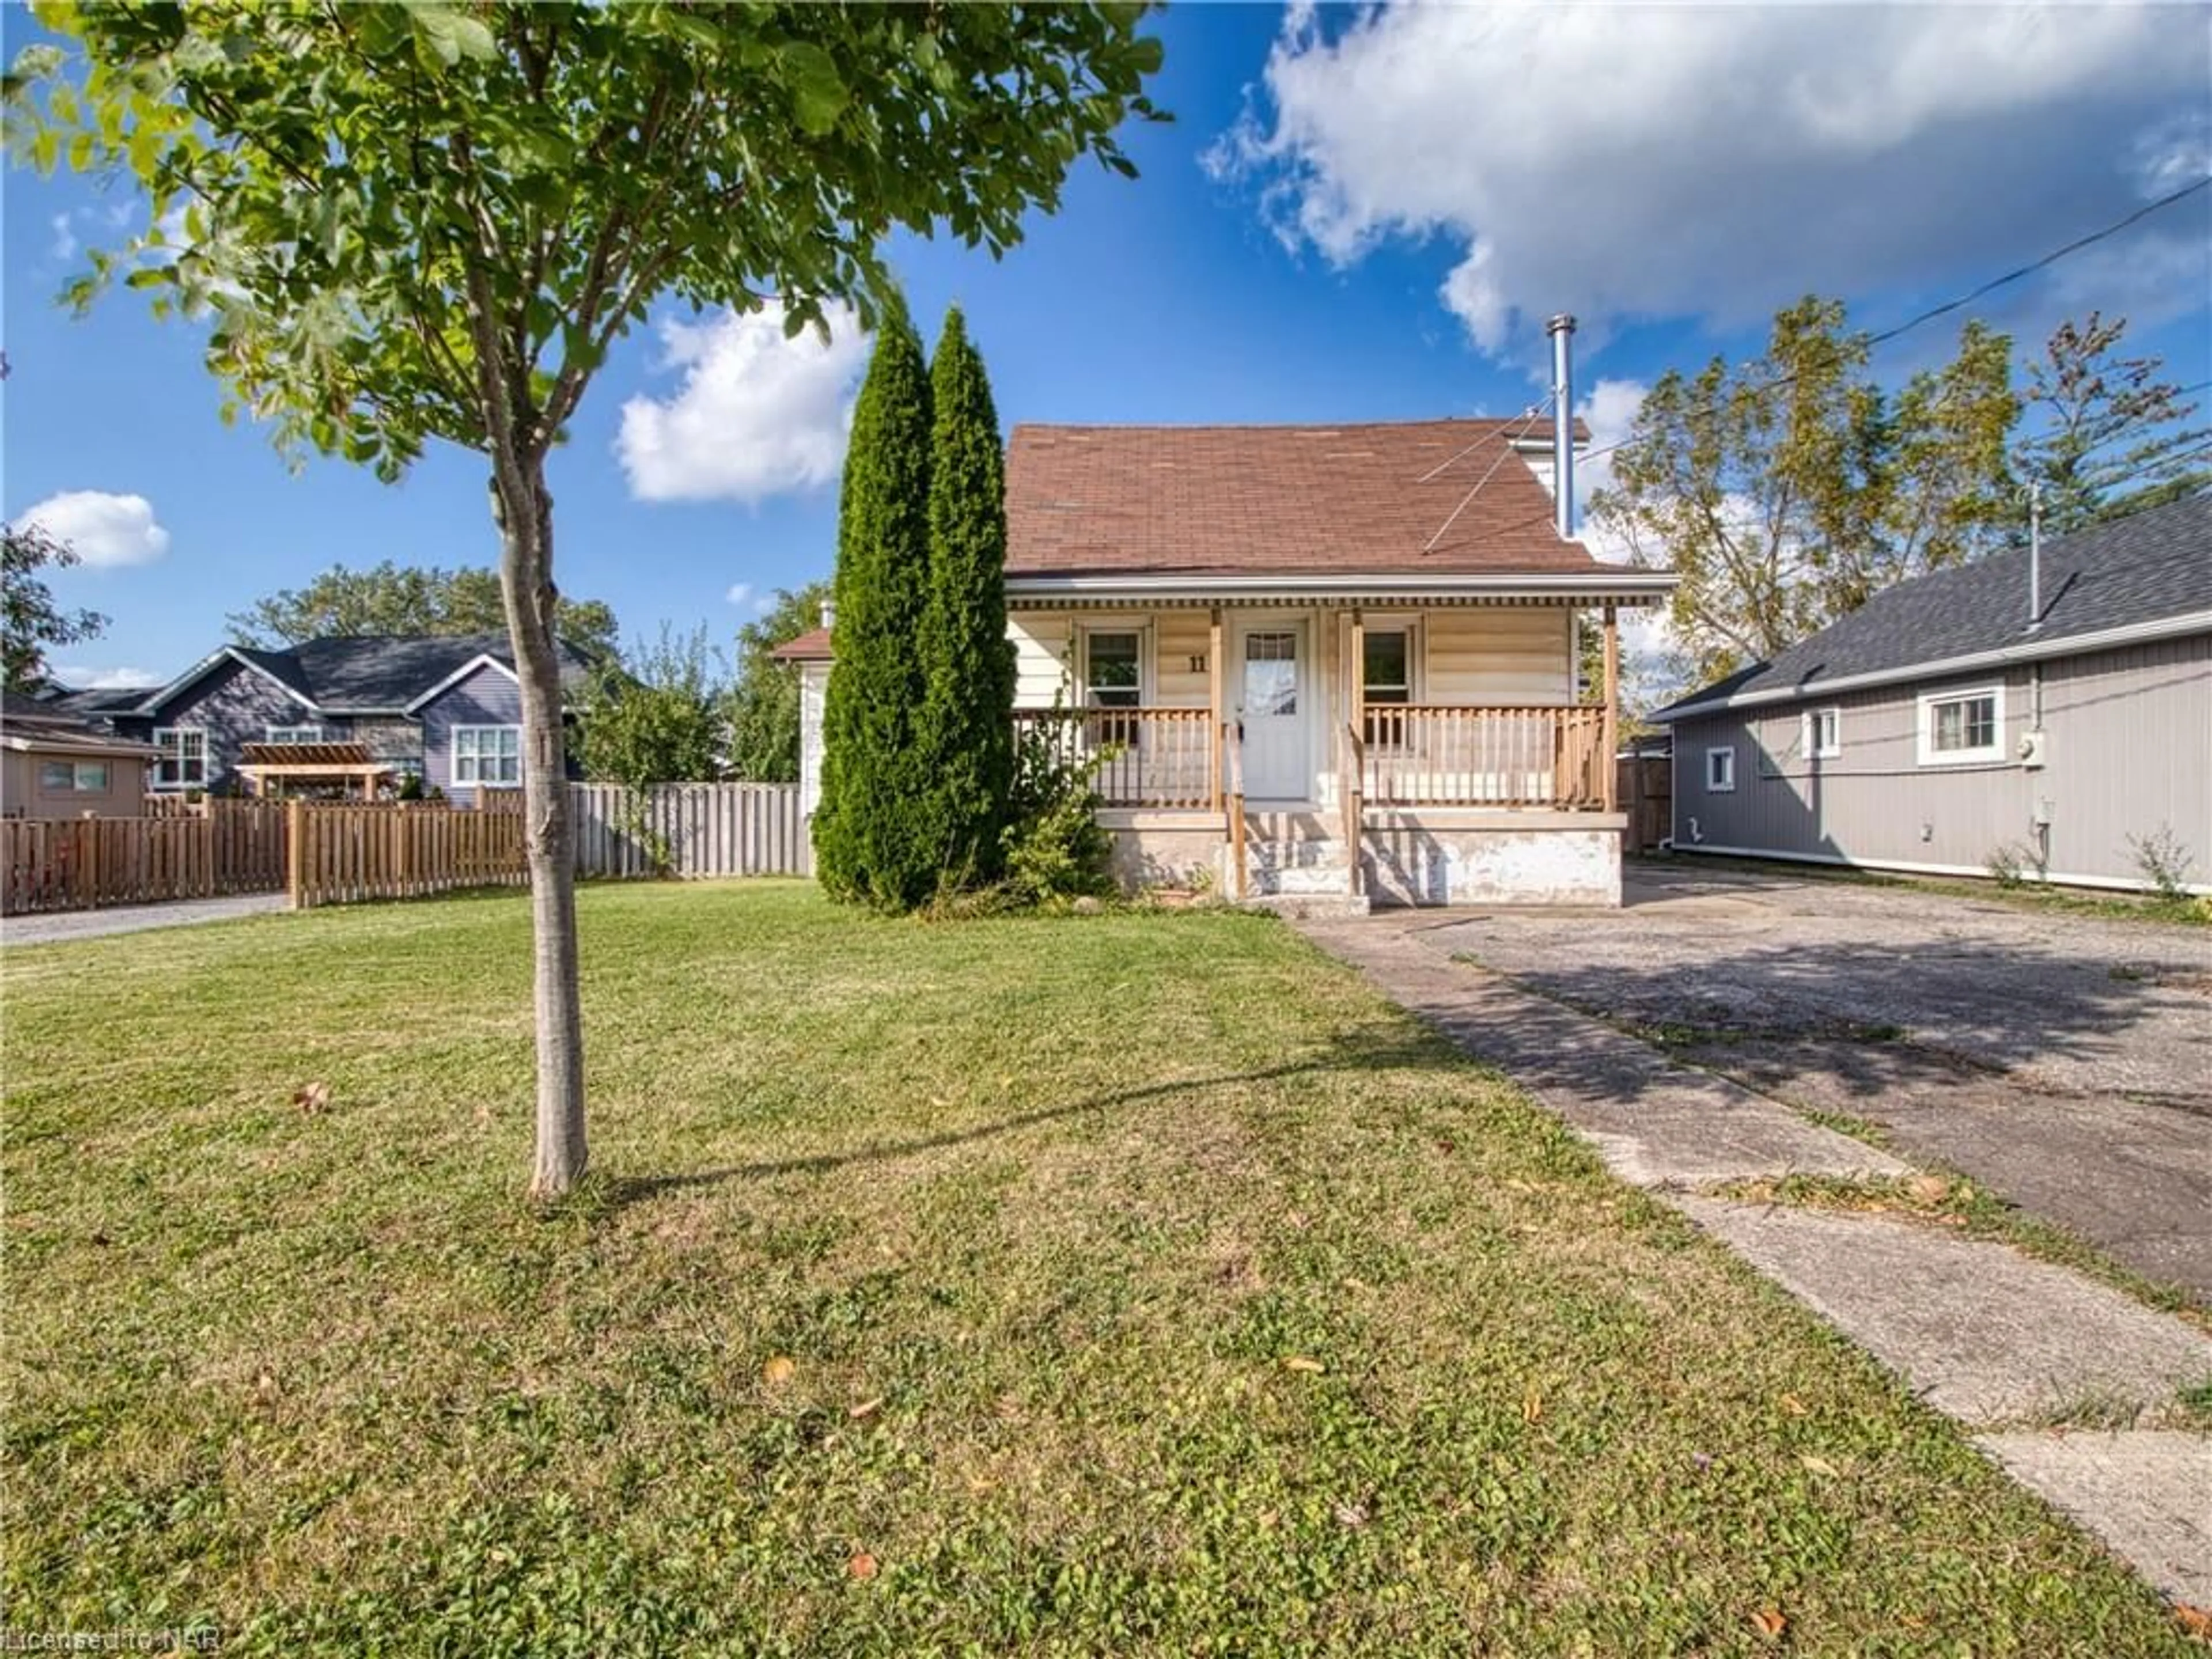 Frontside or backside of a home for 11 Hazel St, St. Catharines Ontario L2T 1E2